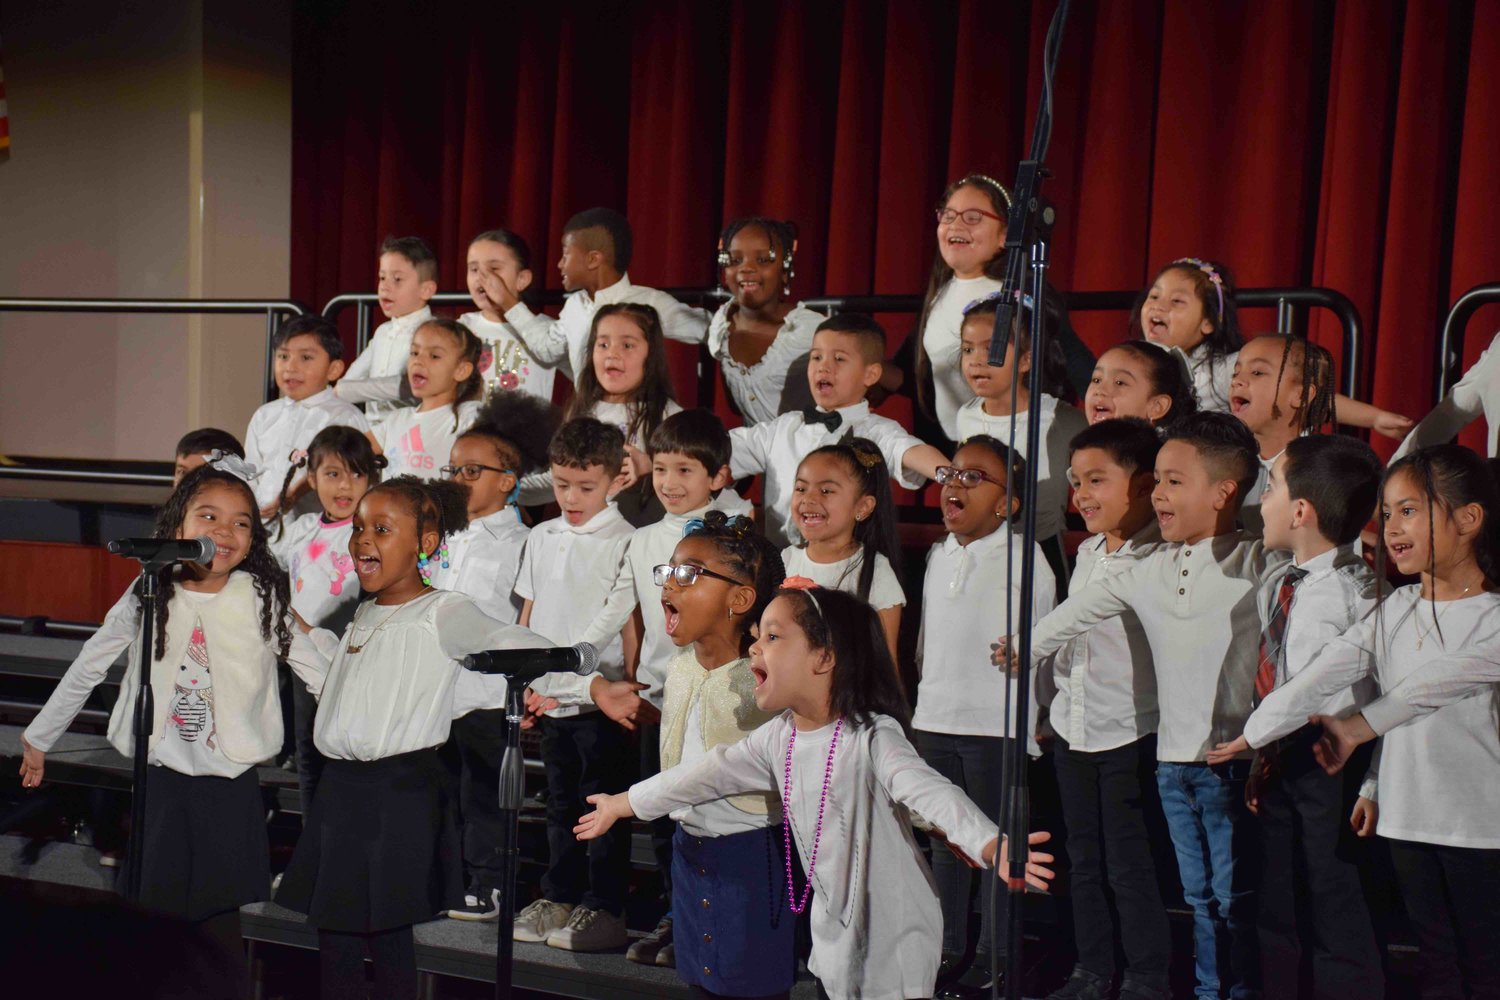 Opening the Black History Month celebration, the kindergarten chorus from Columbus Avenue performed We are Here.